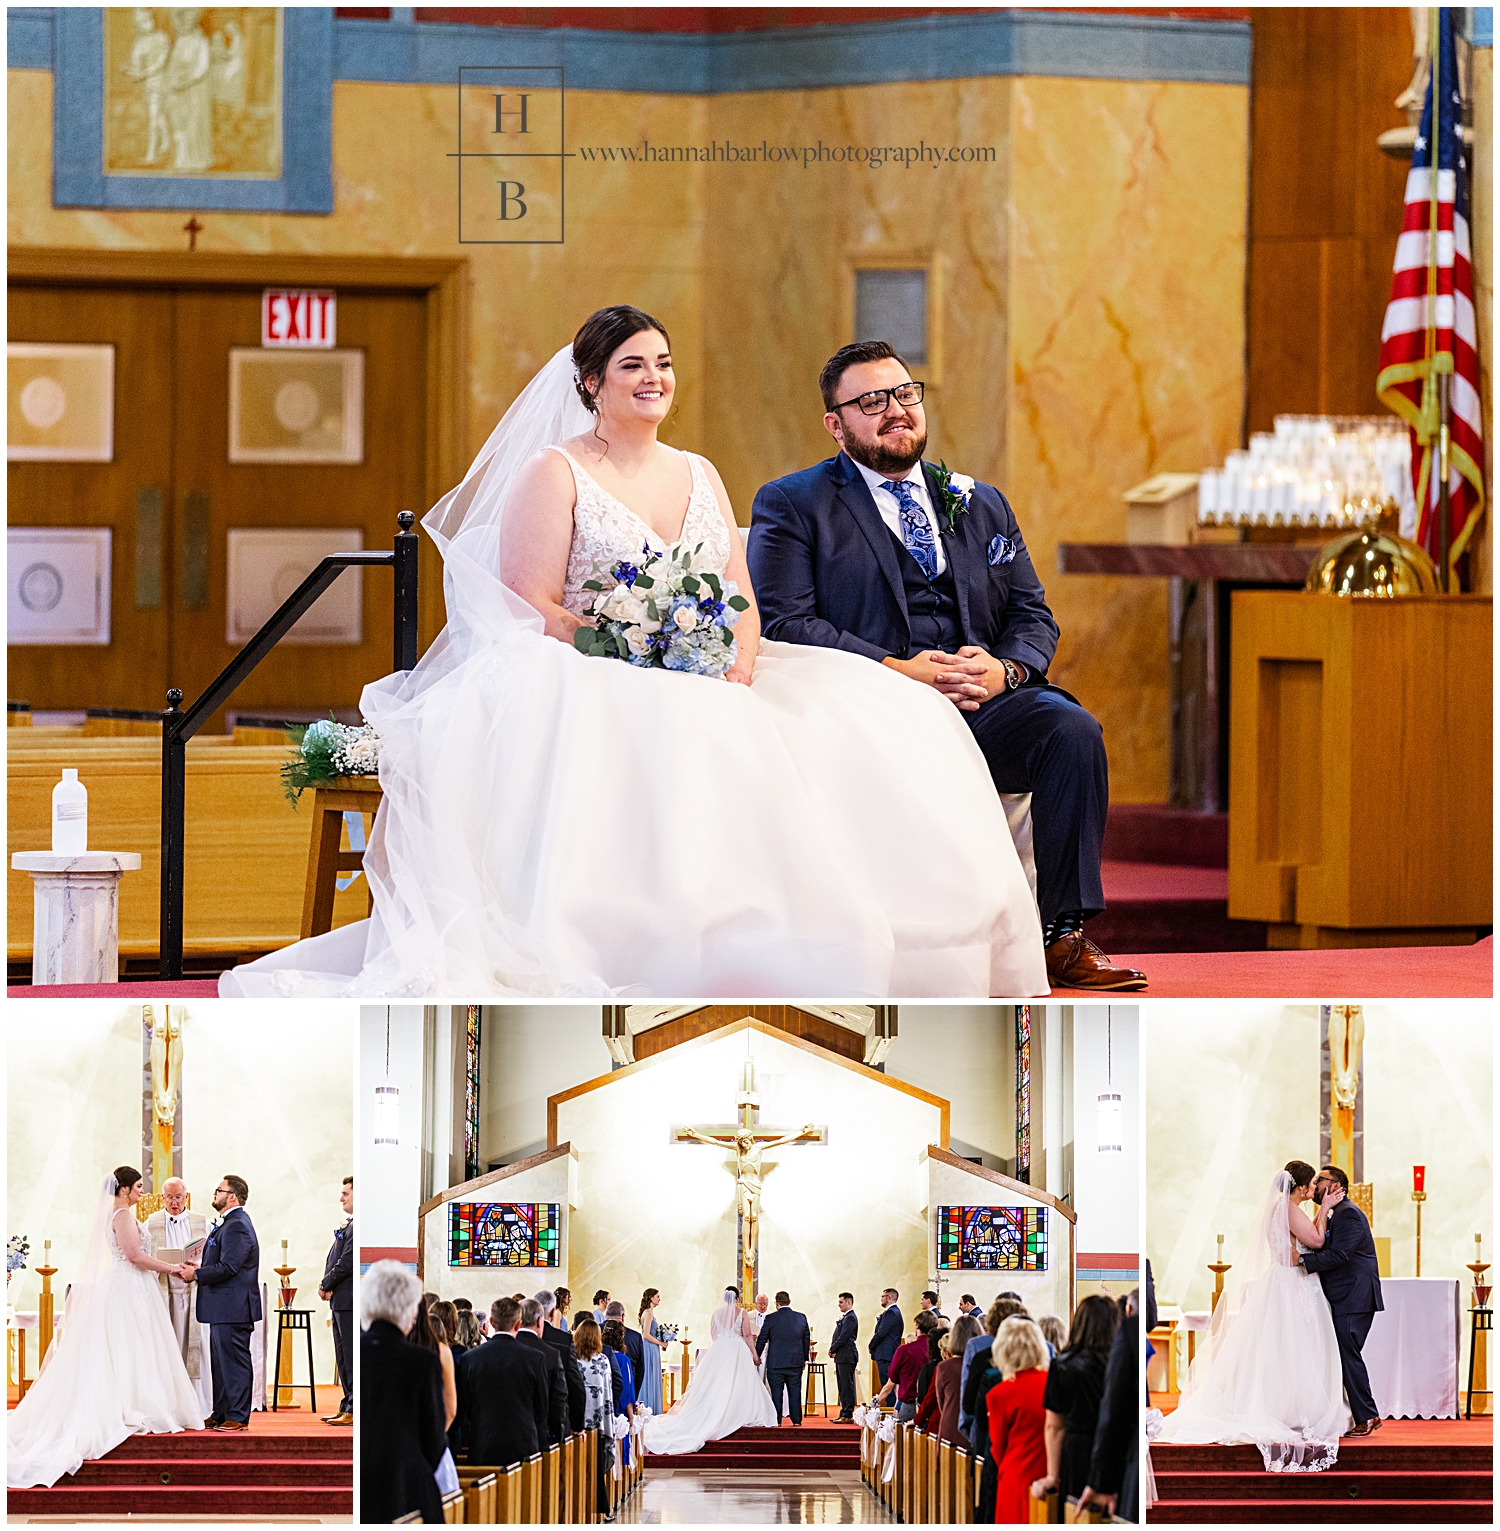 Collage of Catholic Church wedding ceremony with bride and groom smiling at the Priest.